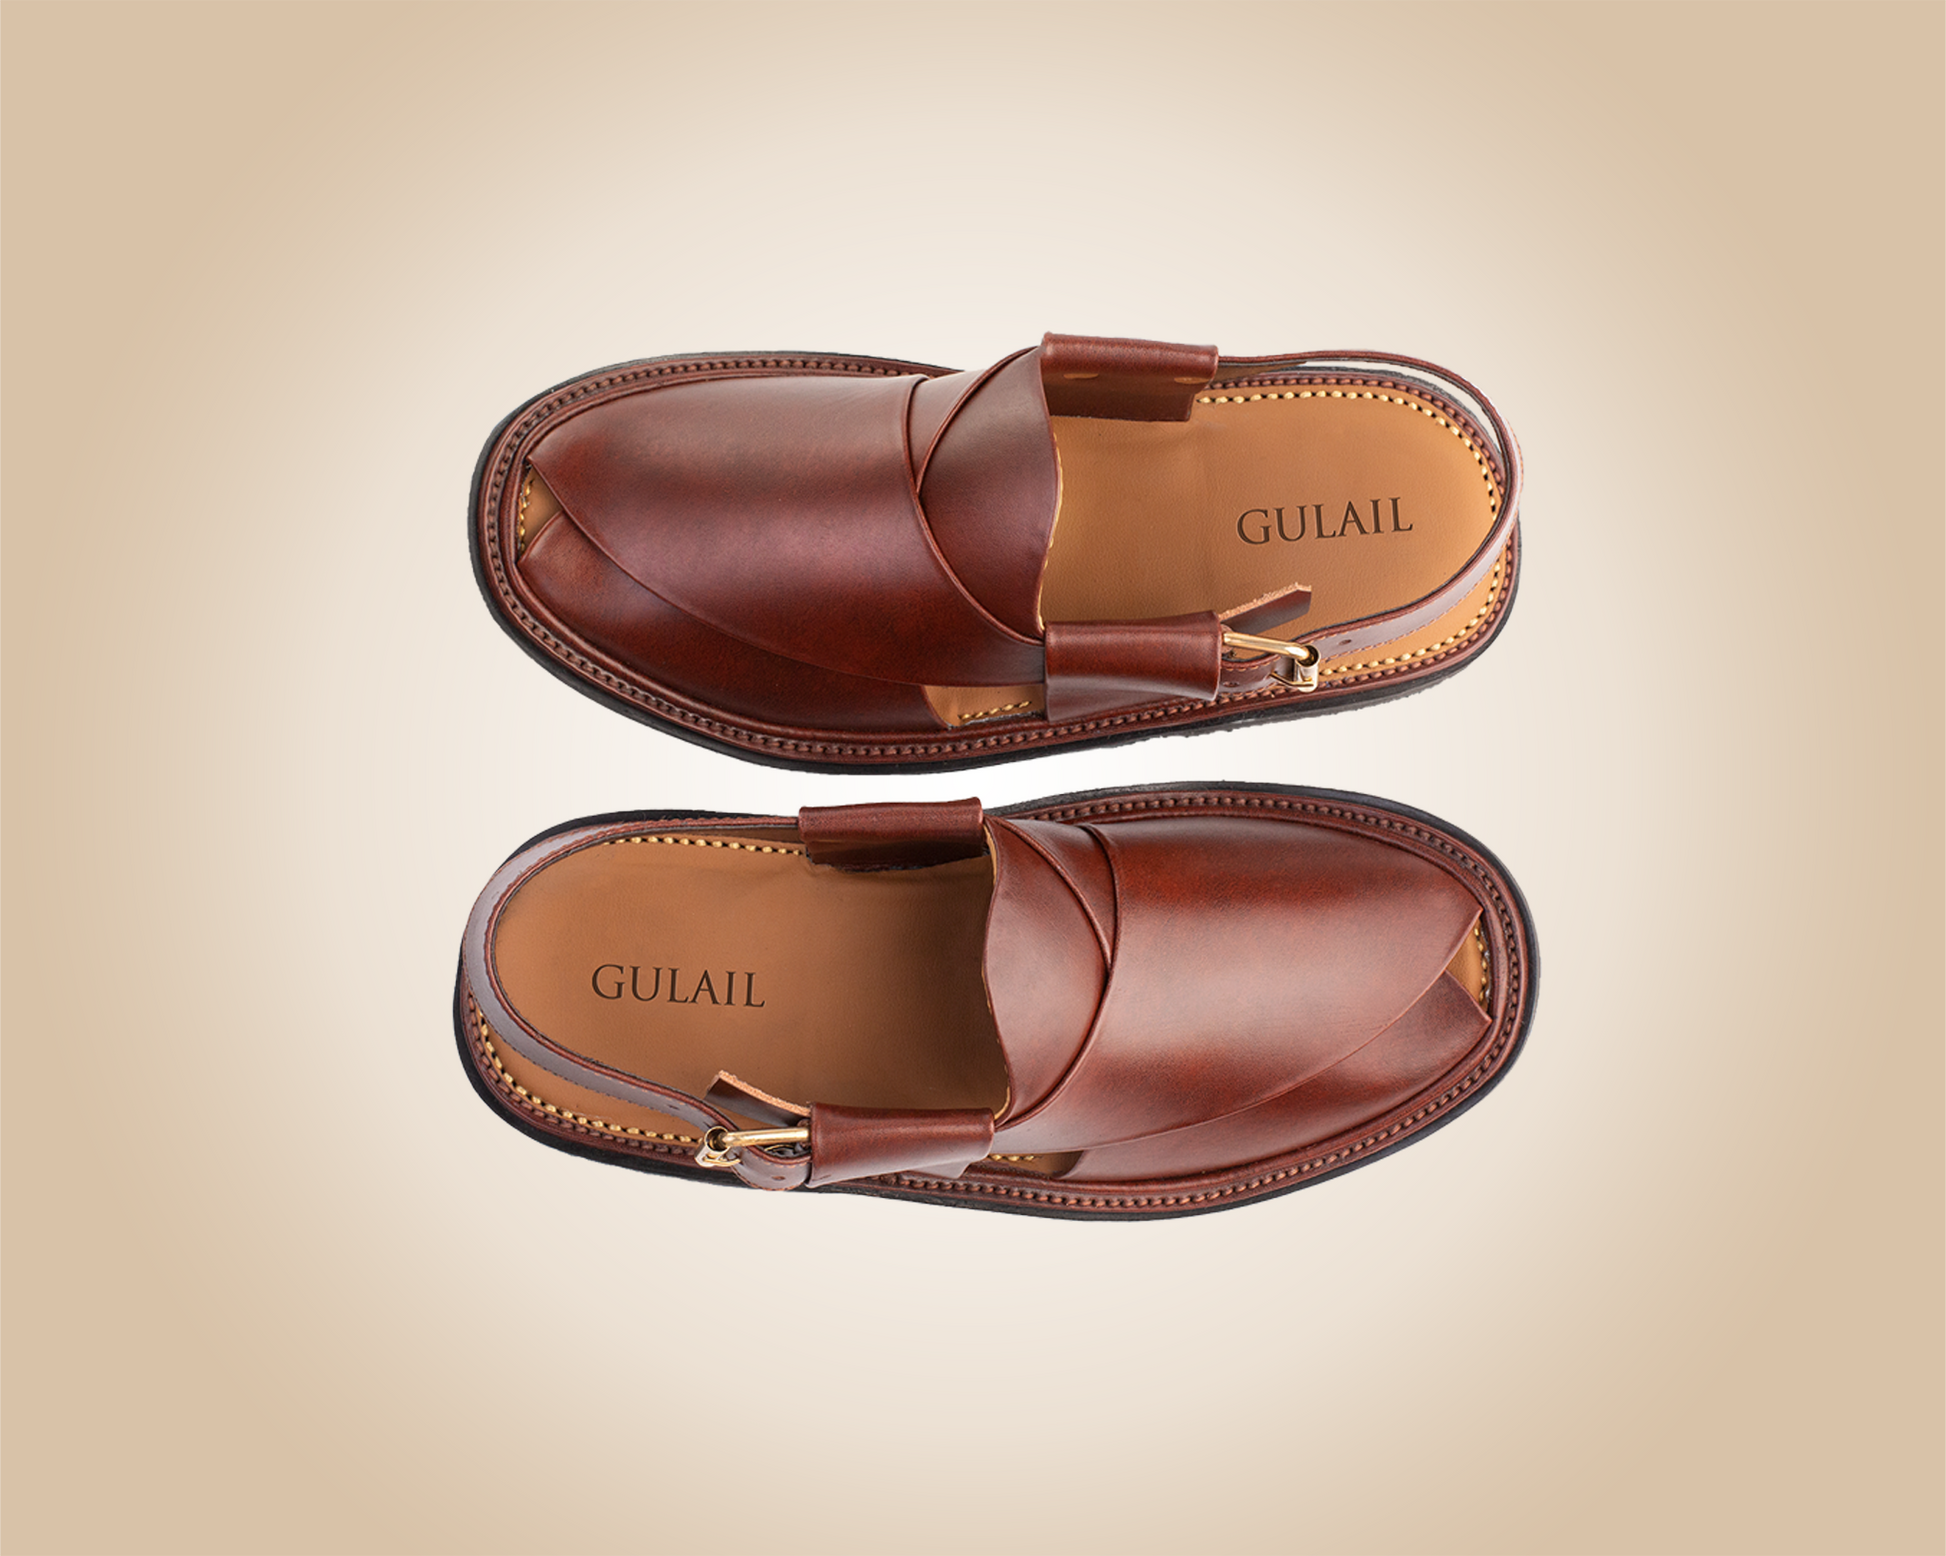 "Round Shape Brown Saply sandals, known as Peshawari Chappal, featuring traditional leather craftsmanship."